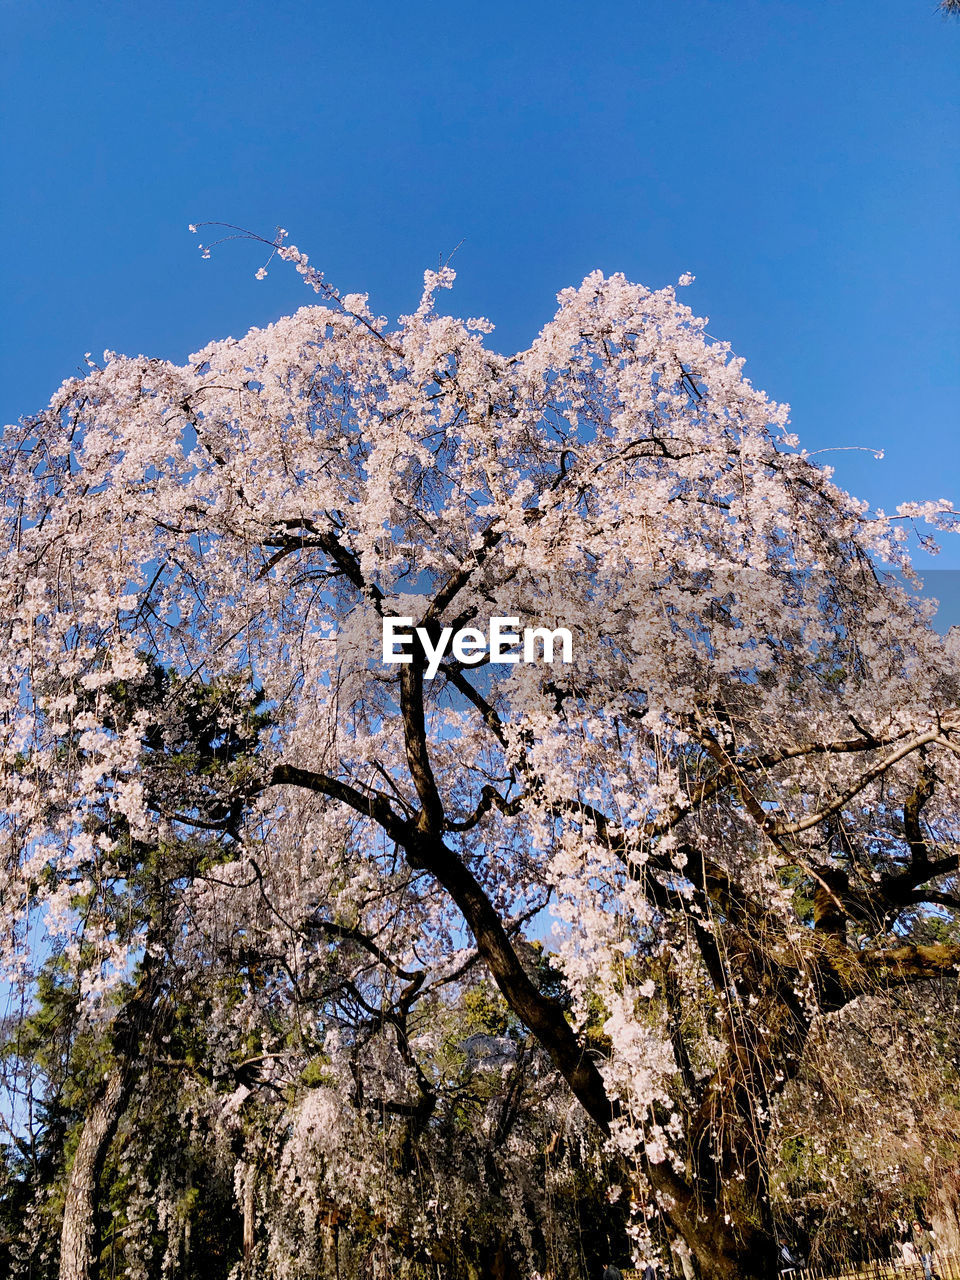 LOW ANGLE VIEW OF CHERRY BLOSSOMS AGAINST CLEAR BLUE SKY